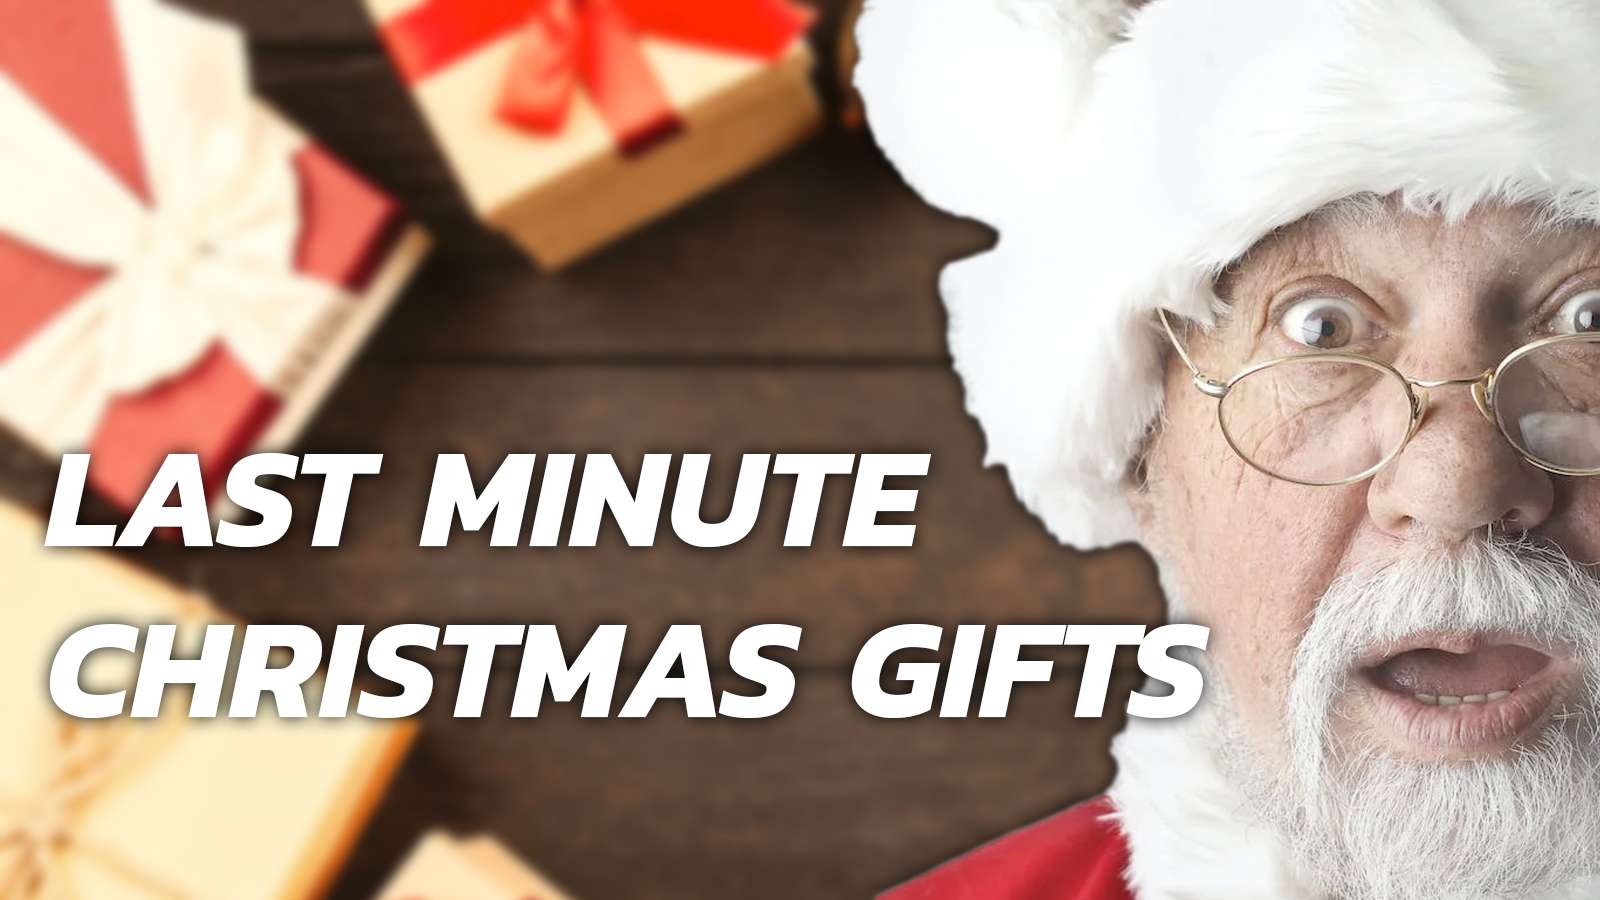 last minute christmas gifts with santa and presents behind